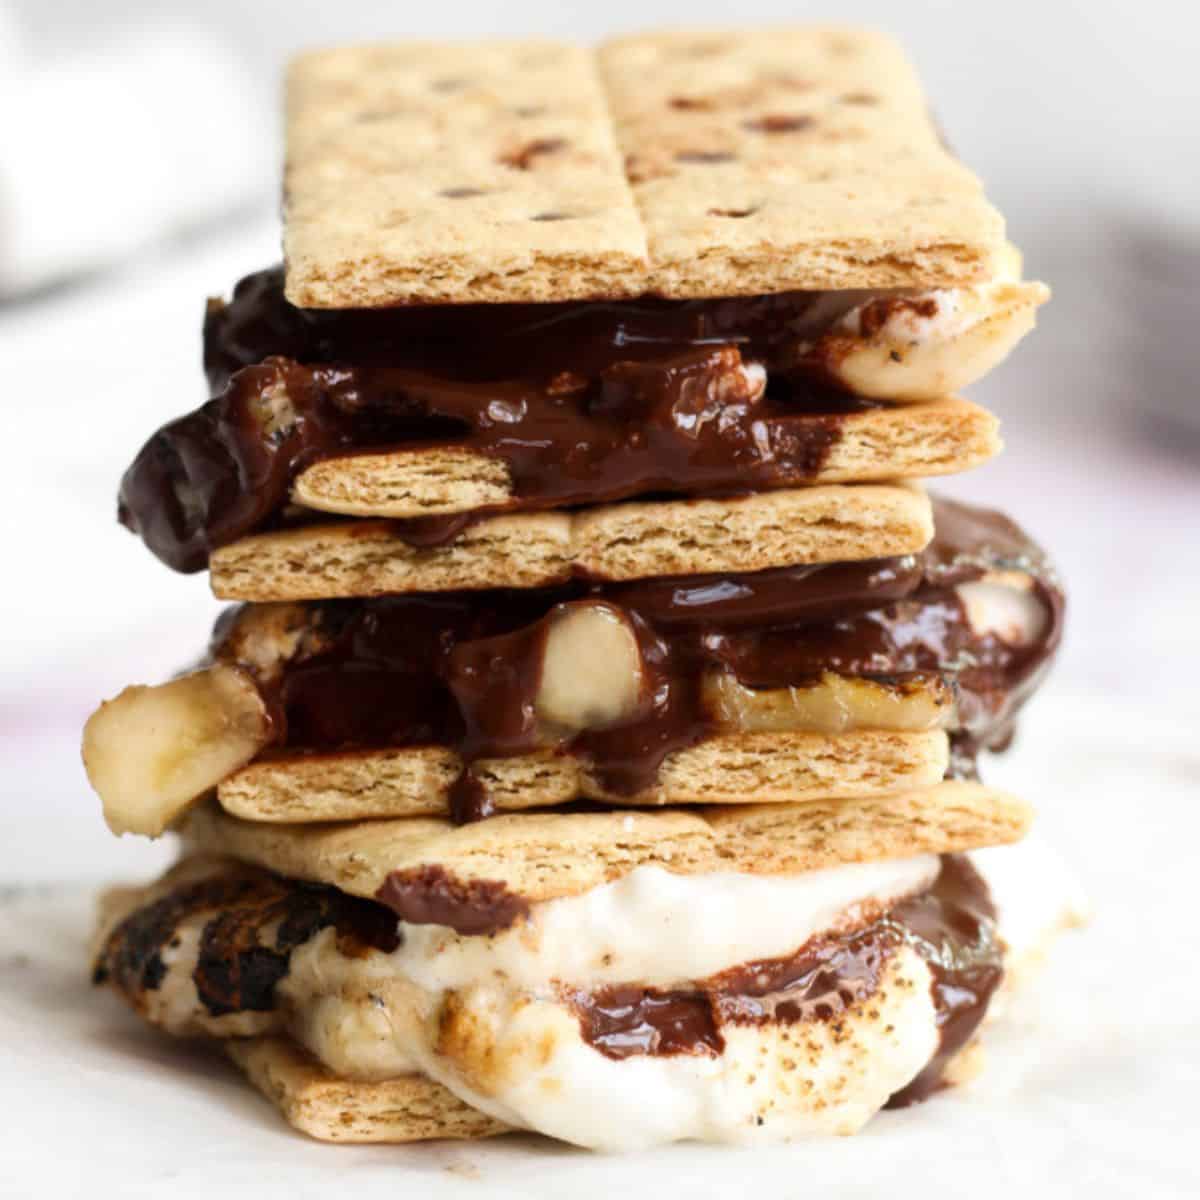 3 air fryer smores stacked on parchment paper with melted chocolate and marshmallows.